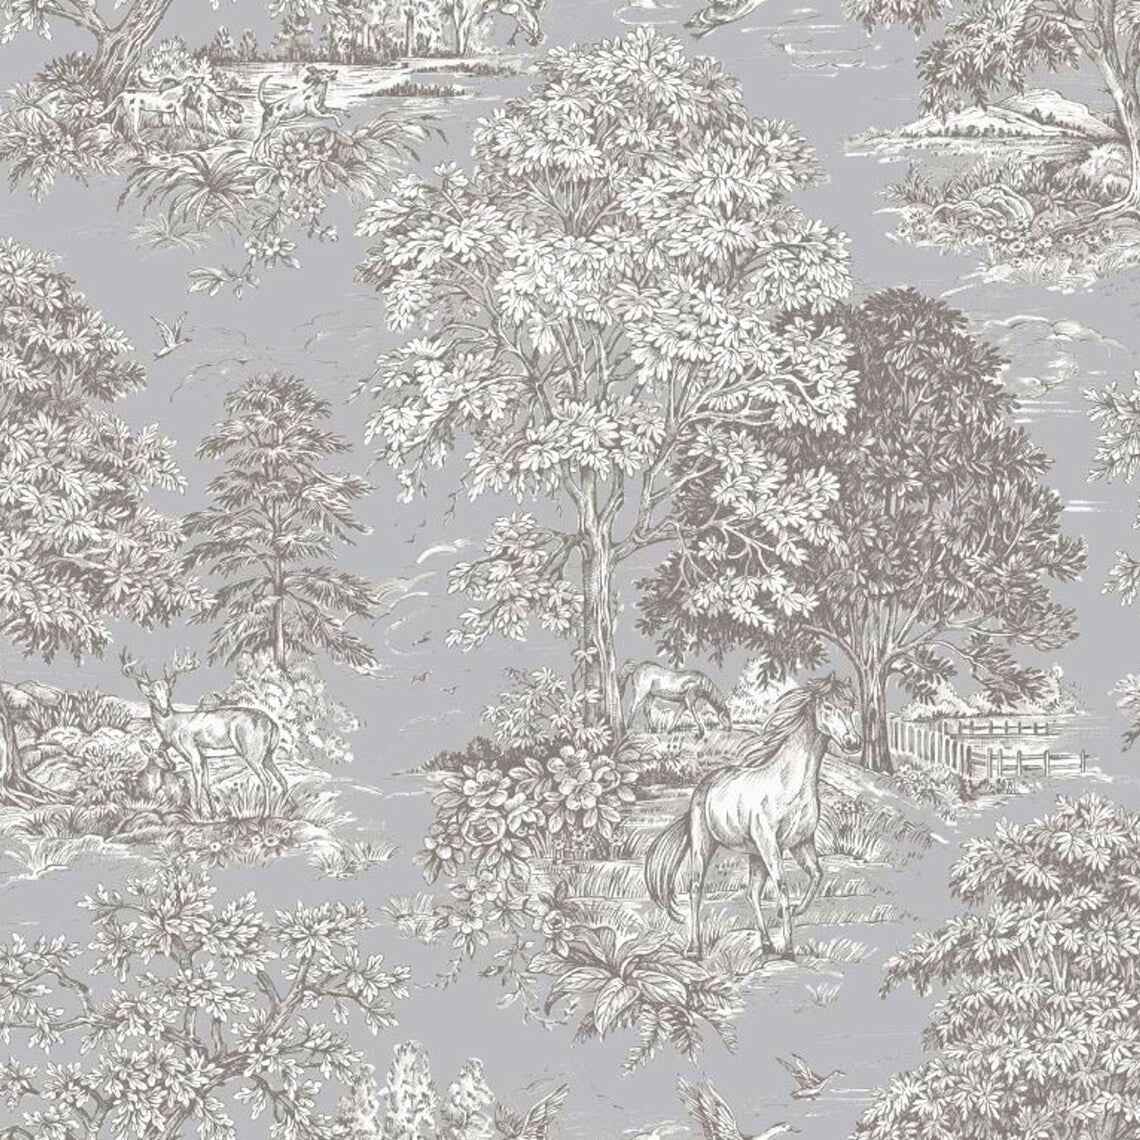 tailored crib skirt in Yellowstone Dove Blue Gray Country Toile- Horses, Deer, Dogs- Large Scale